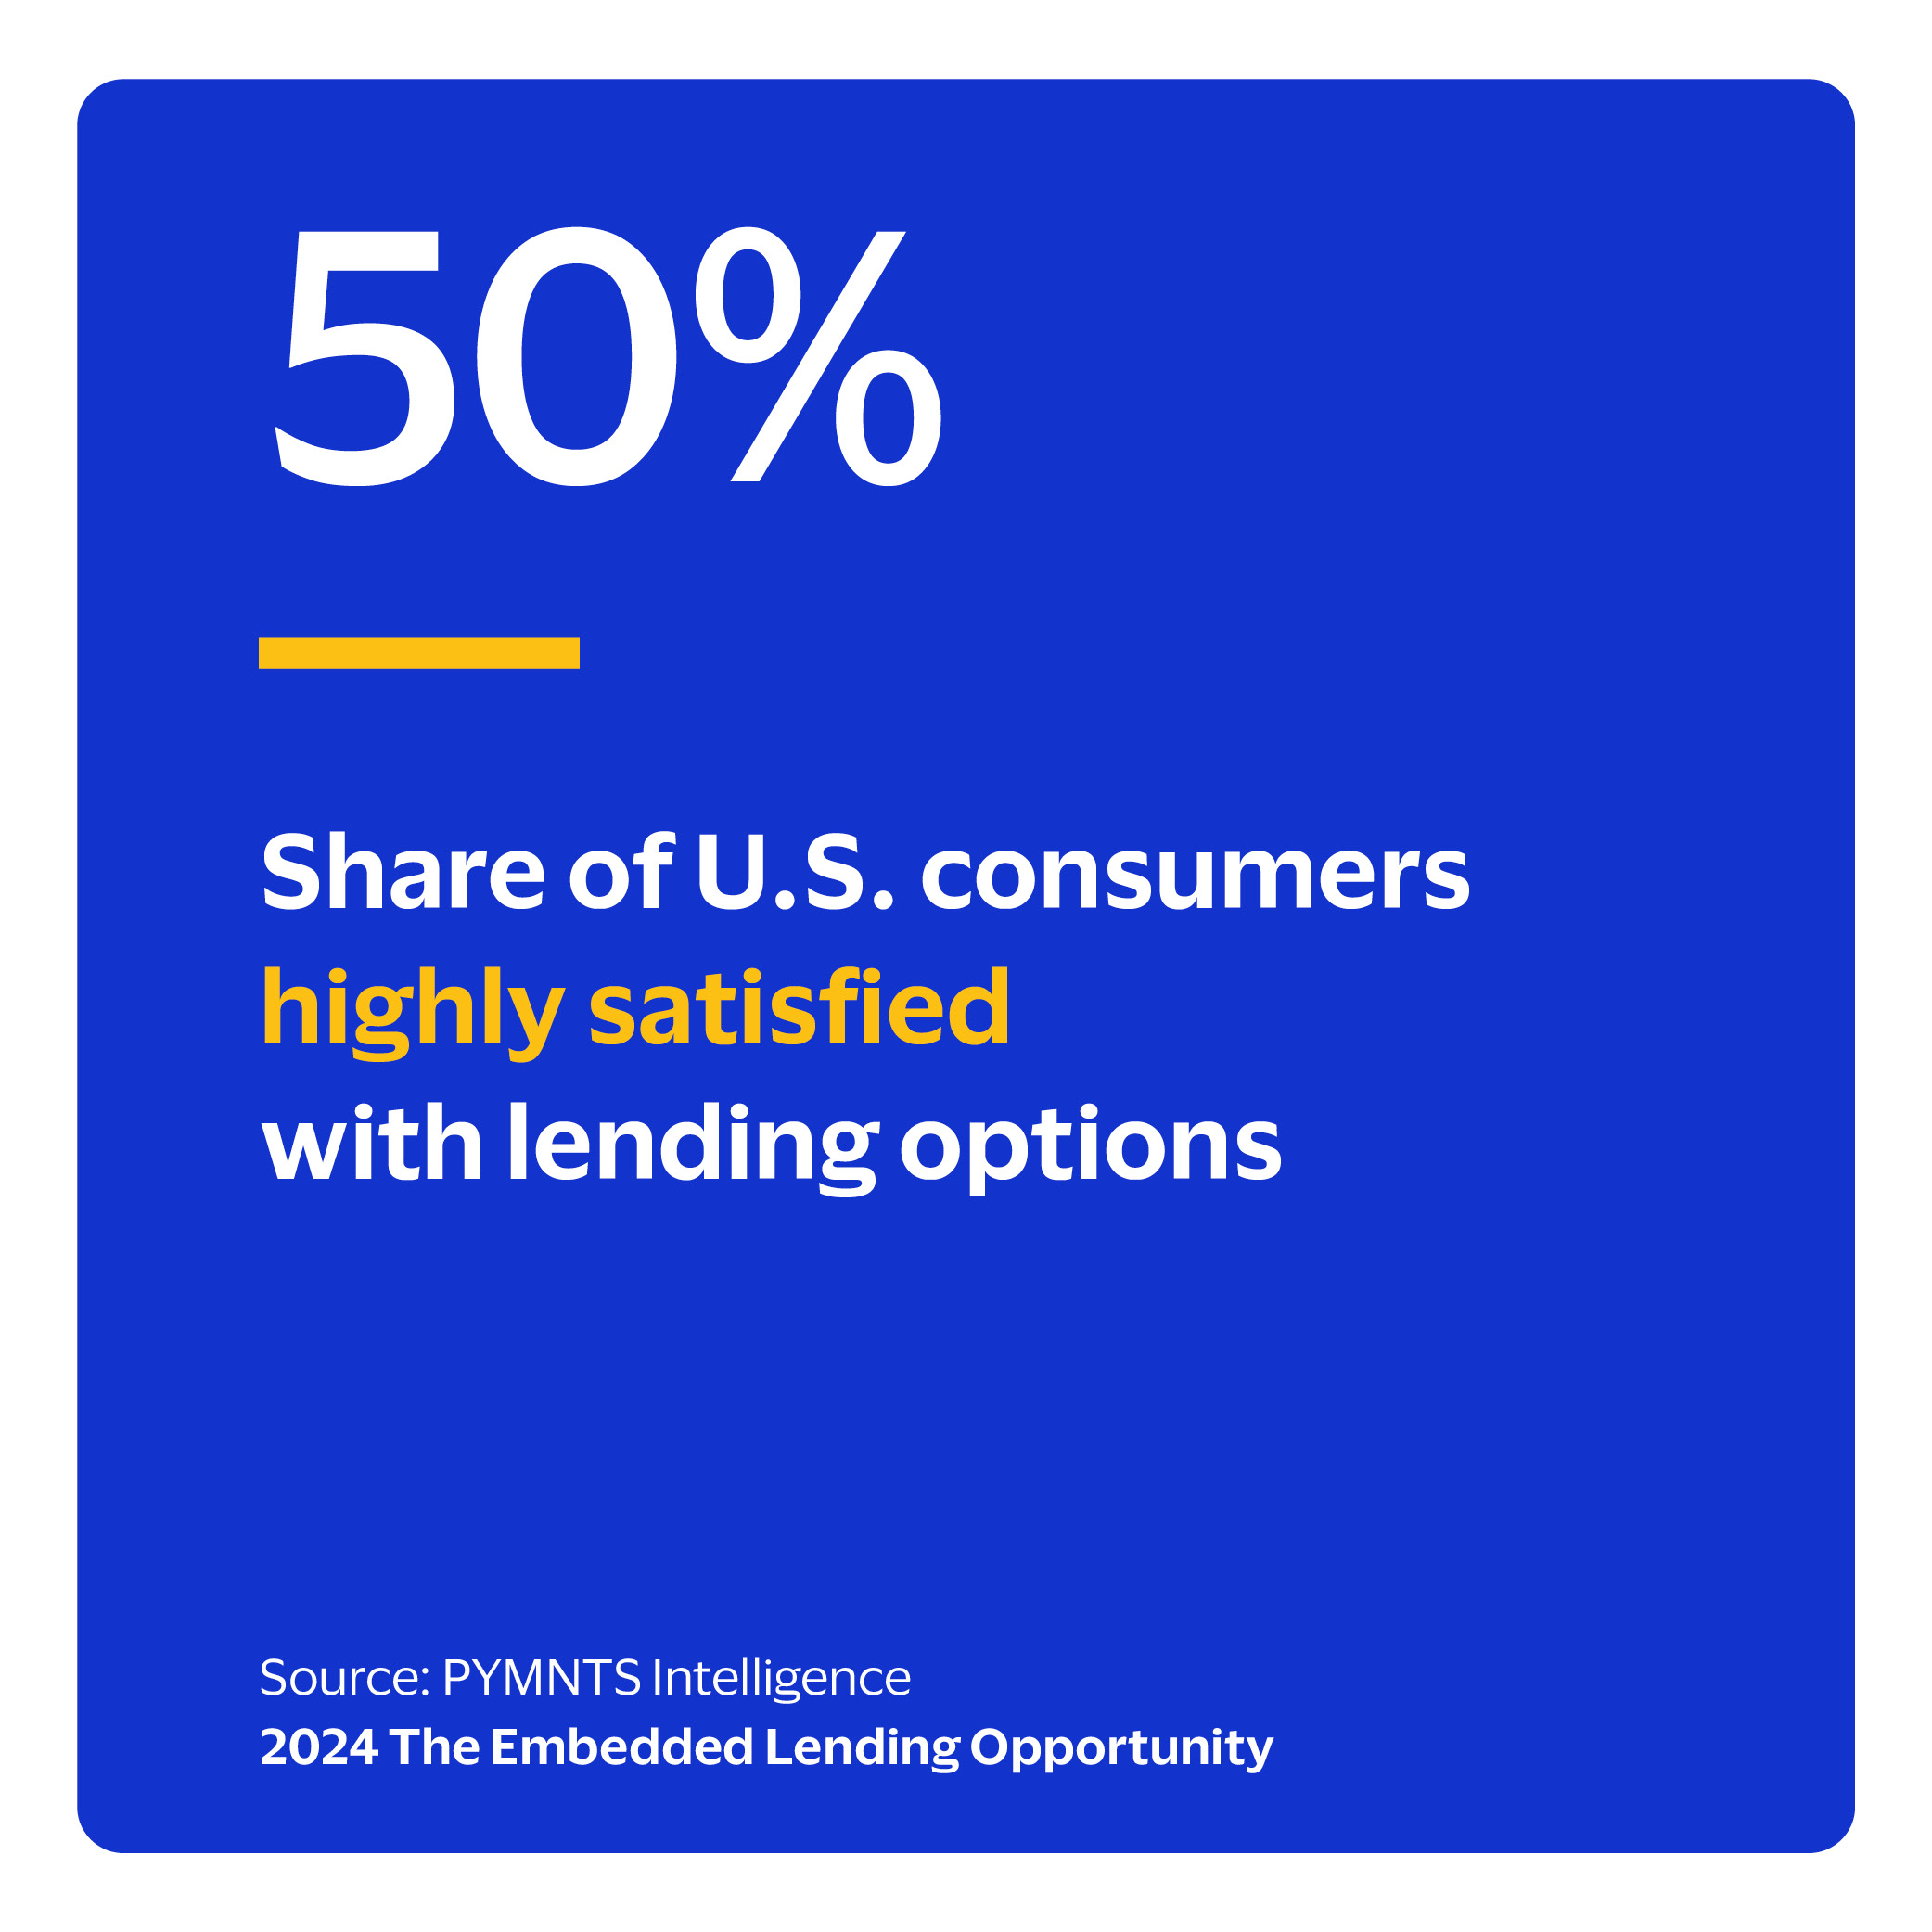 50%: Share of U.S. consumers highly satisfied with lending options